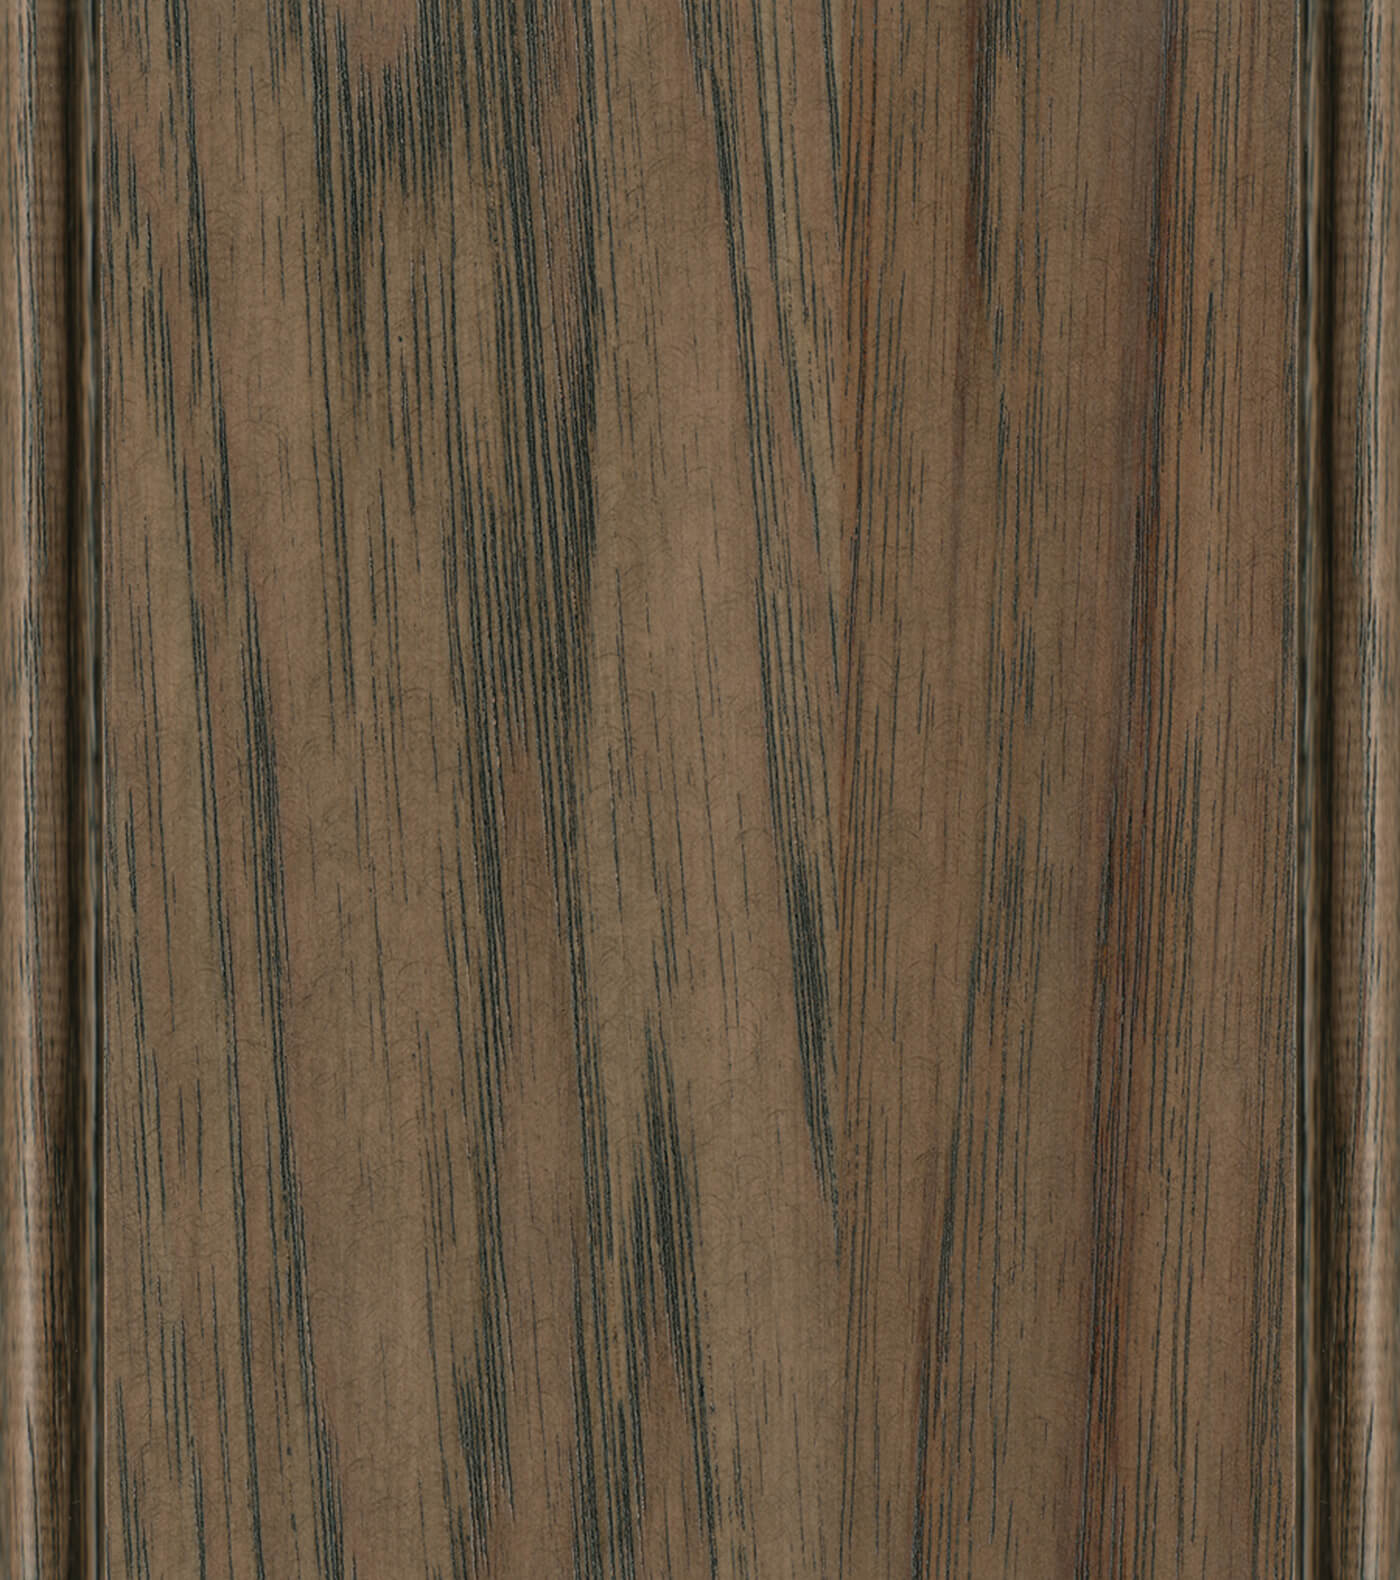 Morel Stain on Hickory or Rustic Hickory